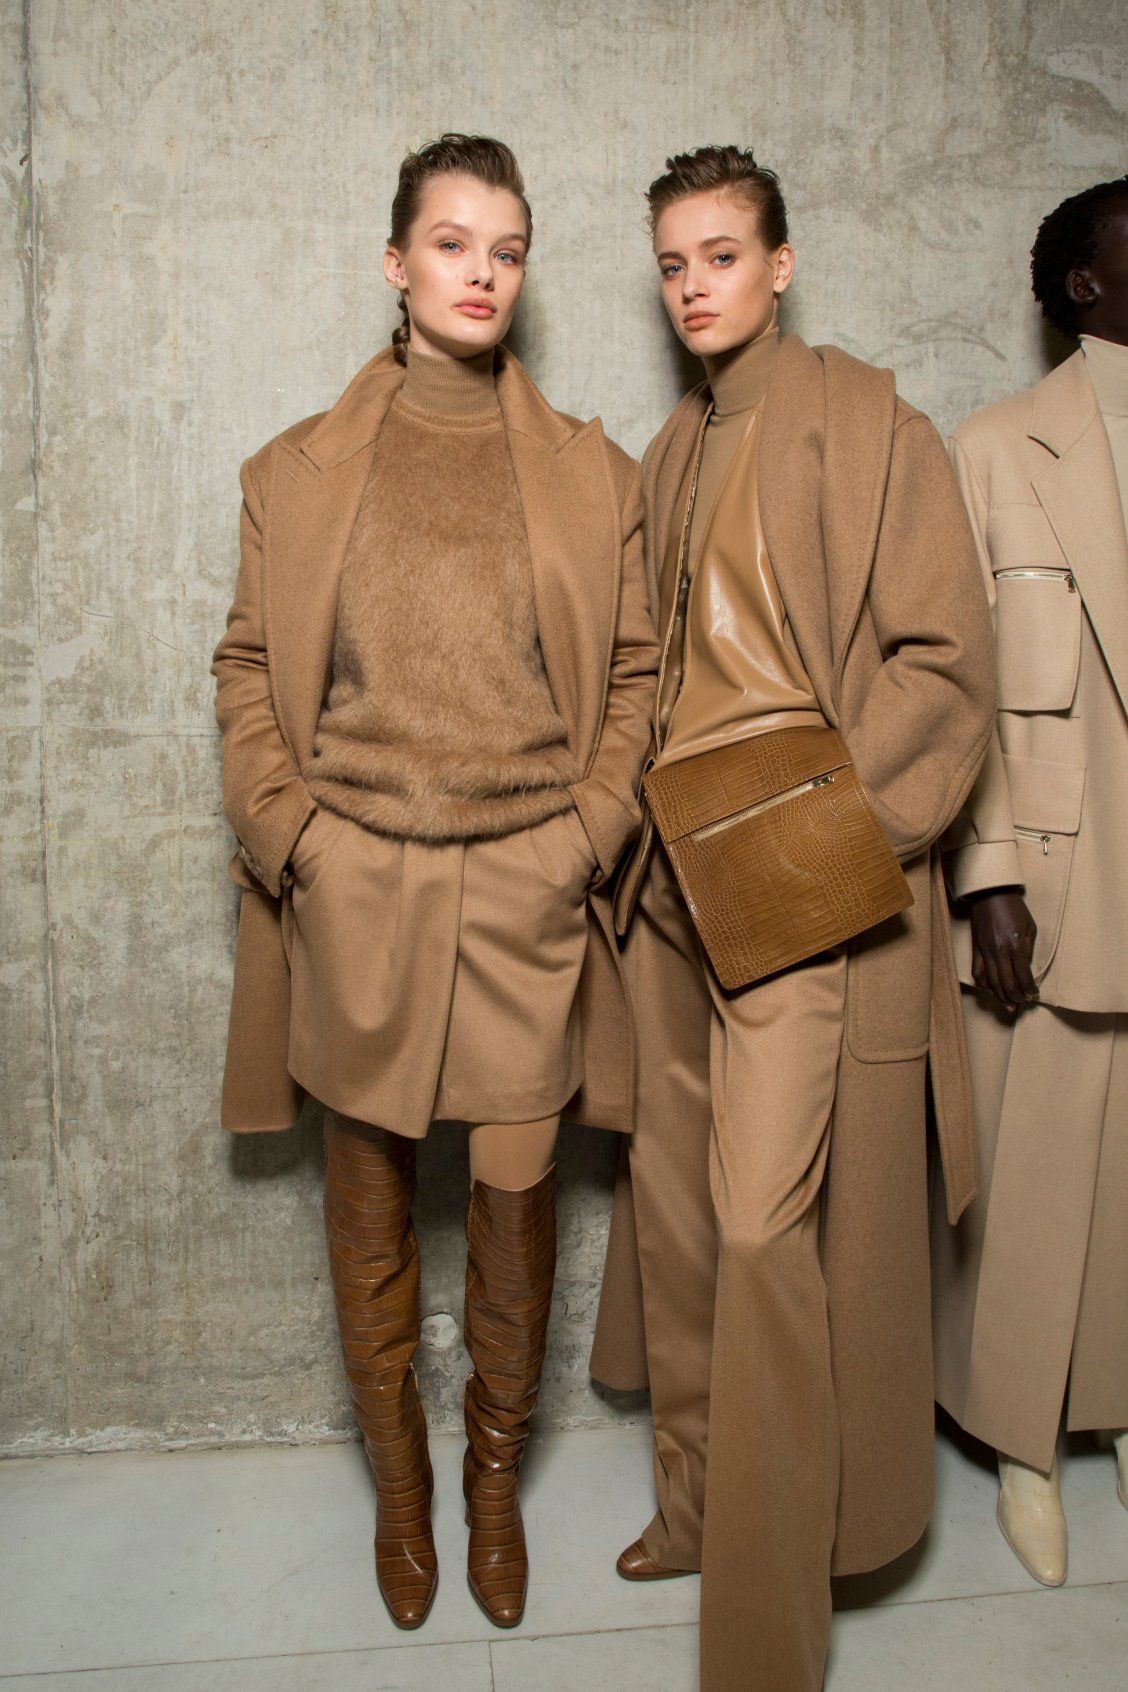 Outfit Pinterest max mara fw19 ready to wear, fashion design: Fashion photography,  Fashion show,  fashion model,  Max Mara,  Beige Outfit,  Brown Boots Outfits,  Ready To Wear  